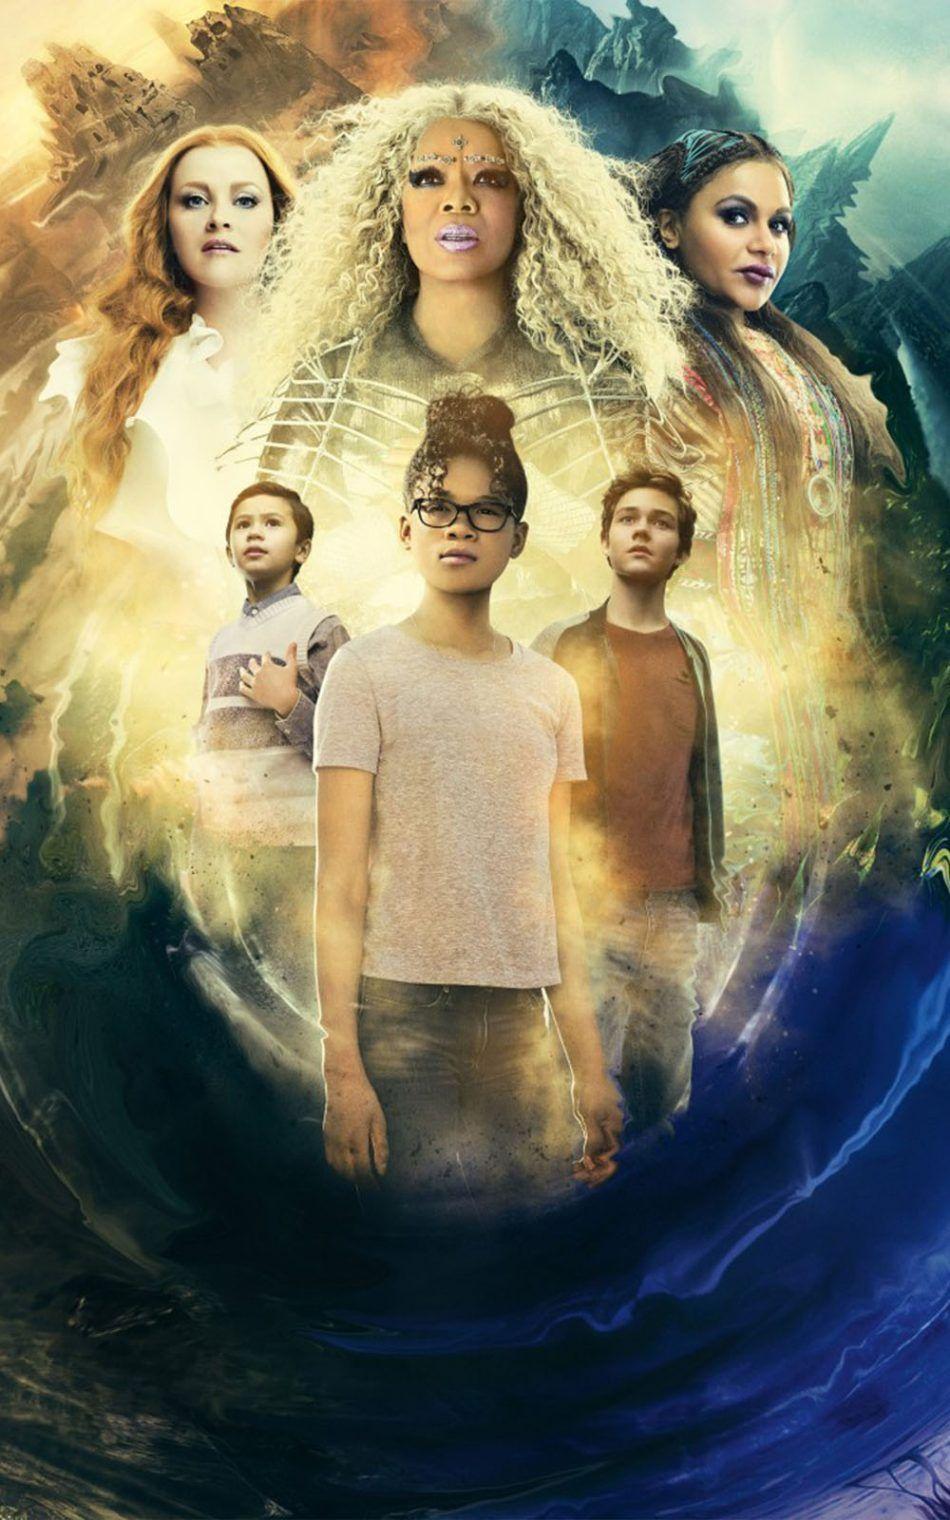 A Wrinkle In Time Free 100% Pure HD Quality Mobile